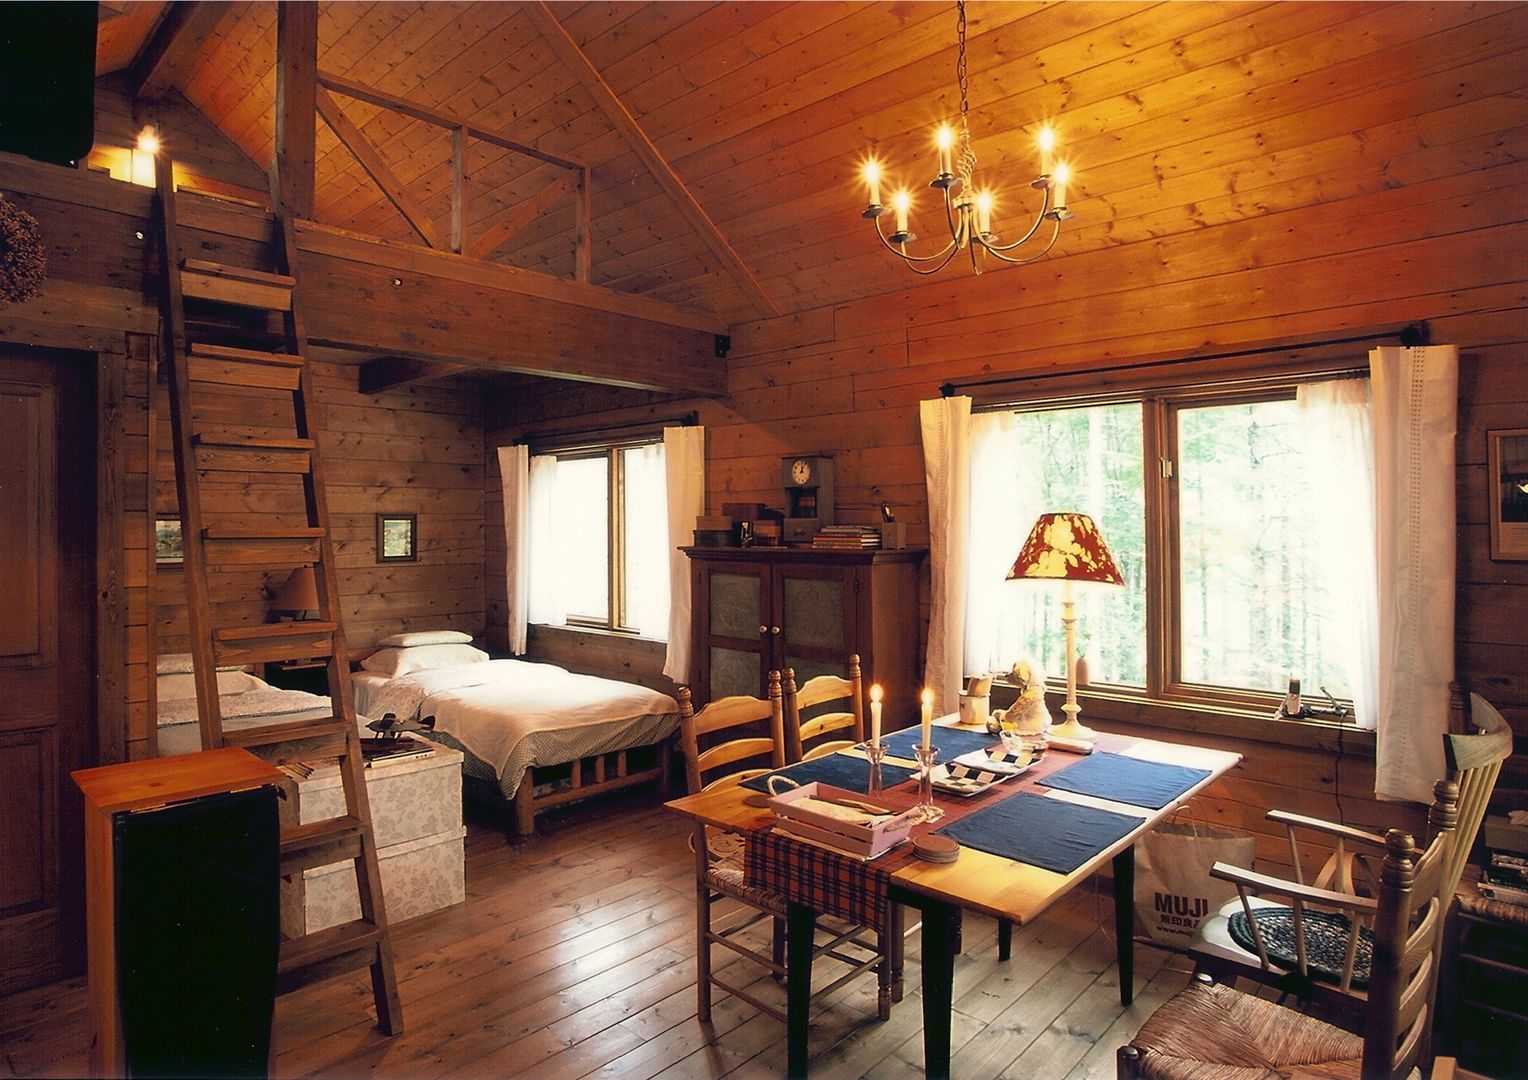 Small Cottage at Mt.Yatsugatake, Japan, Cottage Style / コテージスタイル Cottage Style / コテージスタイル Obývací pokoj